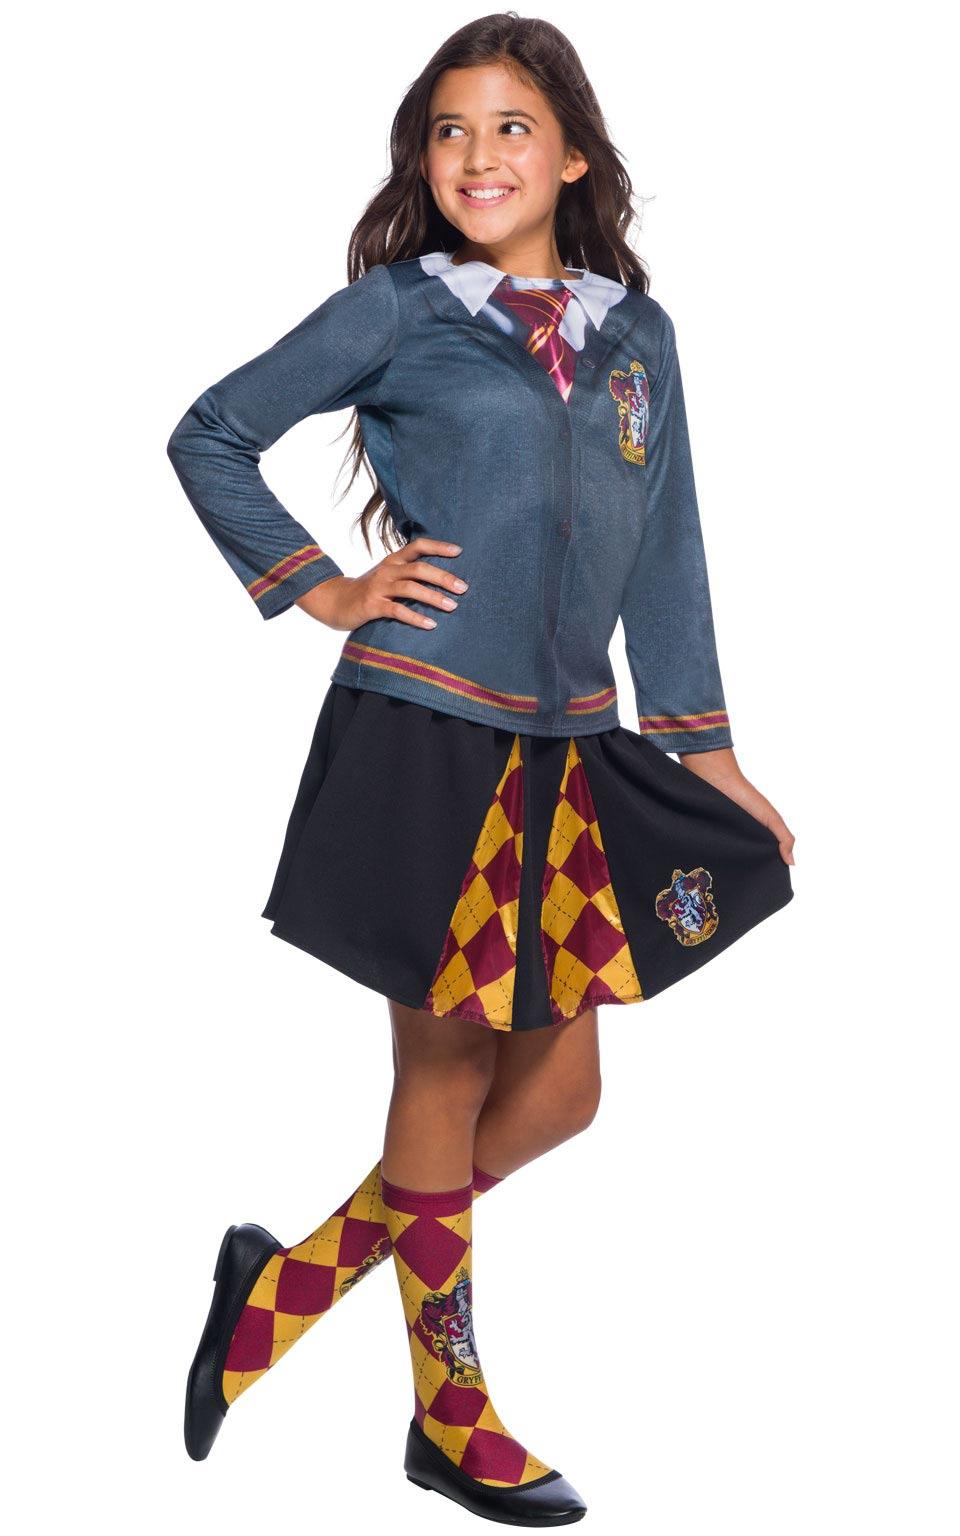 Girl's Gryffindor House Socks by Rubies 39308 and fully licensed. Available from a large selection of Harry Potter costume accessories available here at Karnival Costumes online party shop